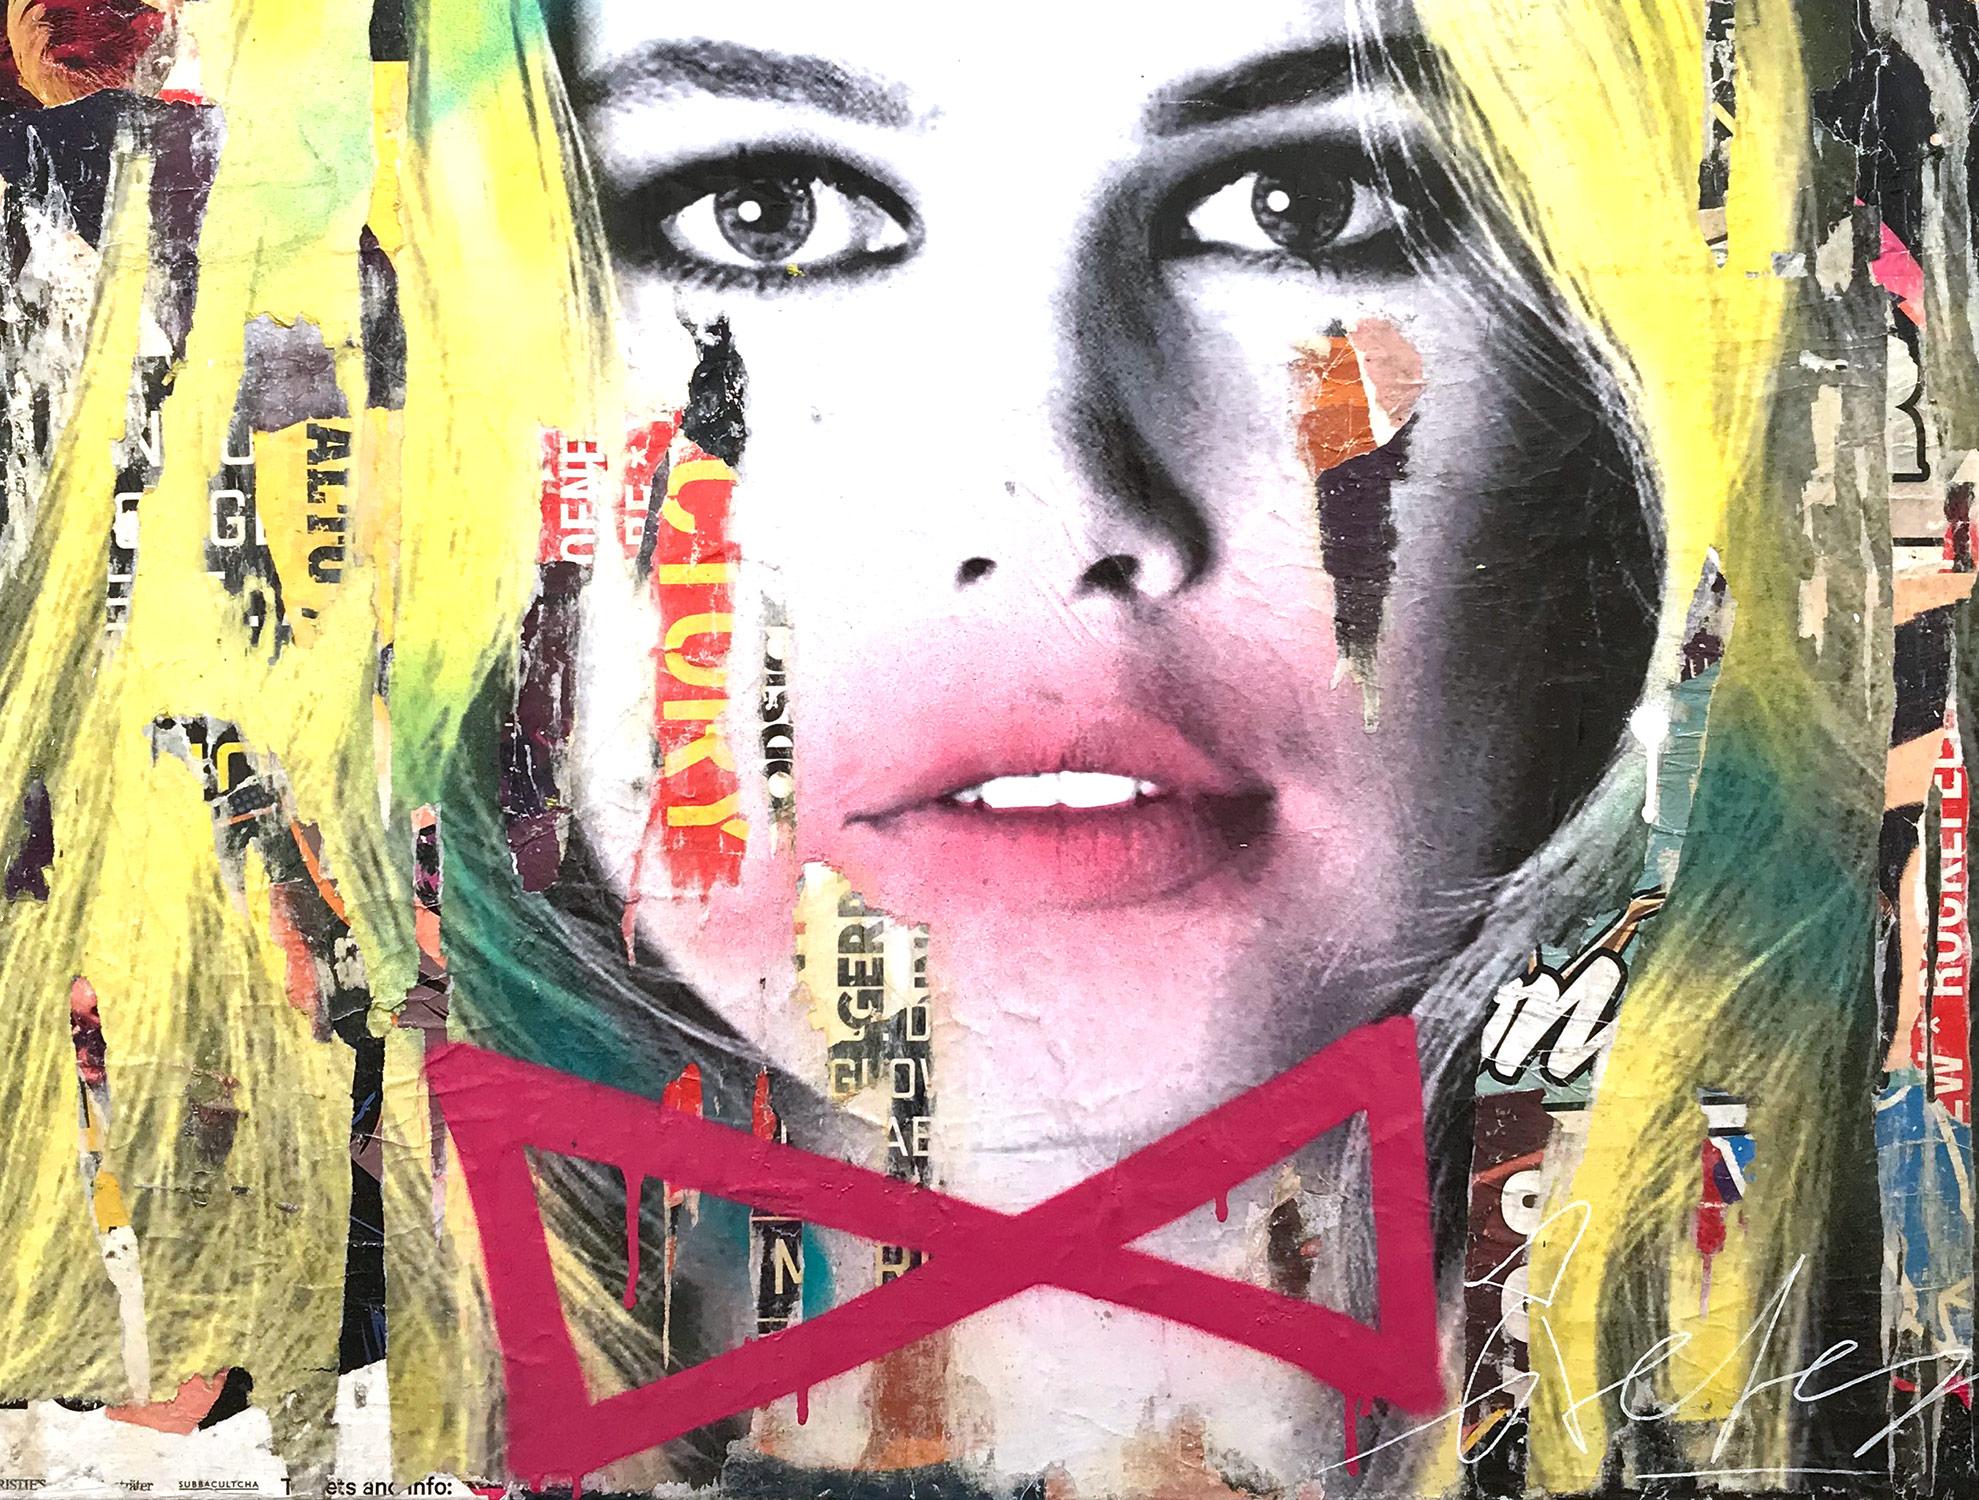 This piece depicts famous German actress and model Claudia Schiffer. Done with beautiful expressive colors and a distinctive street art design, this piece pops with energy and romantic beauty. Its composition and bold collage makes a wonderful